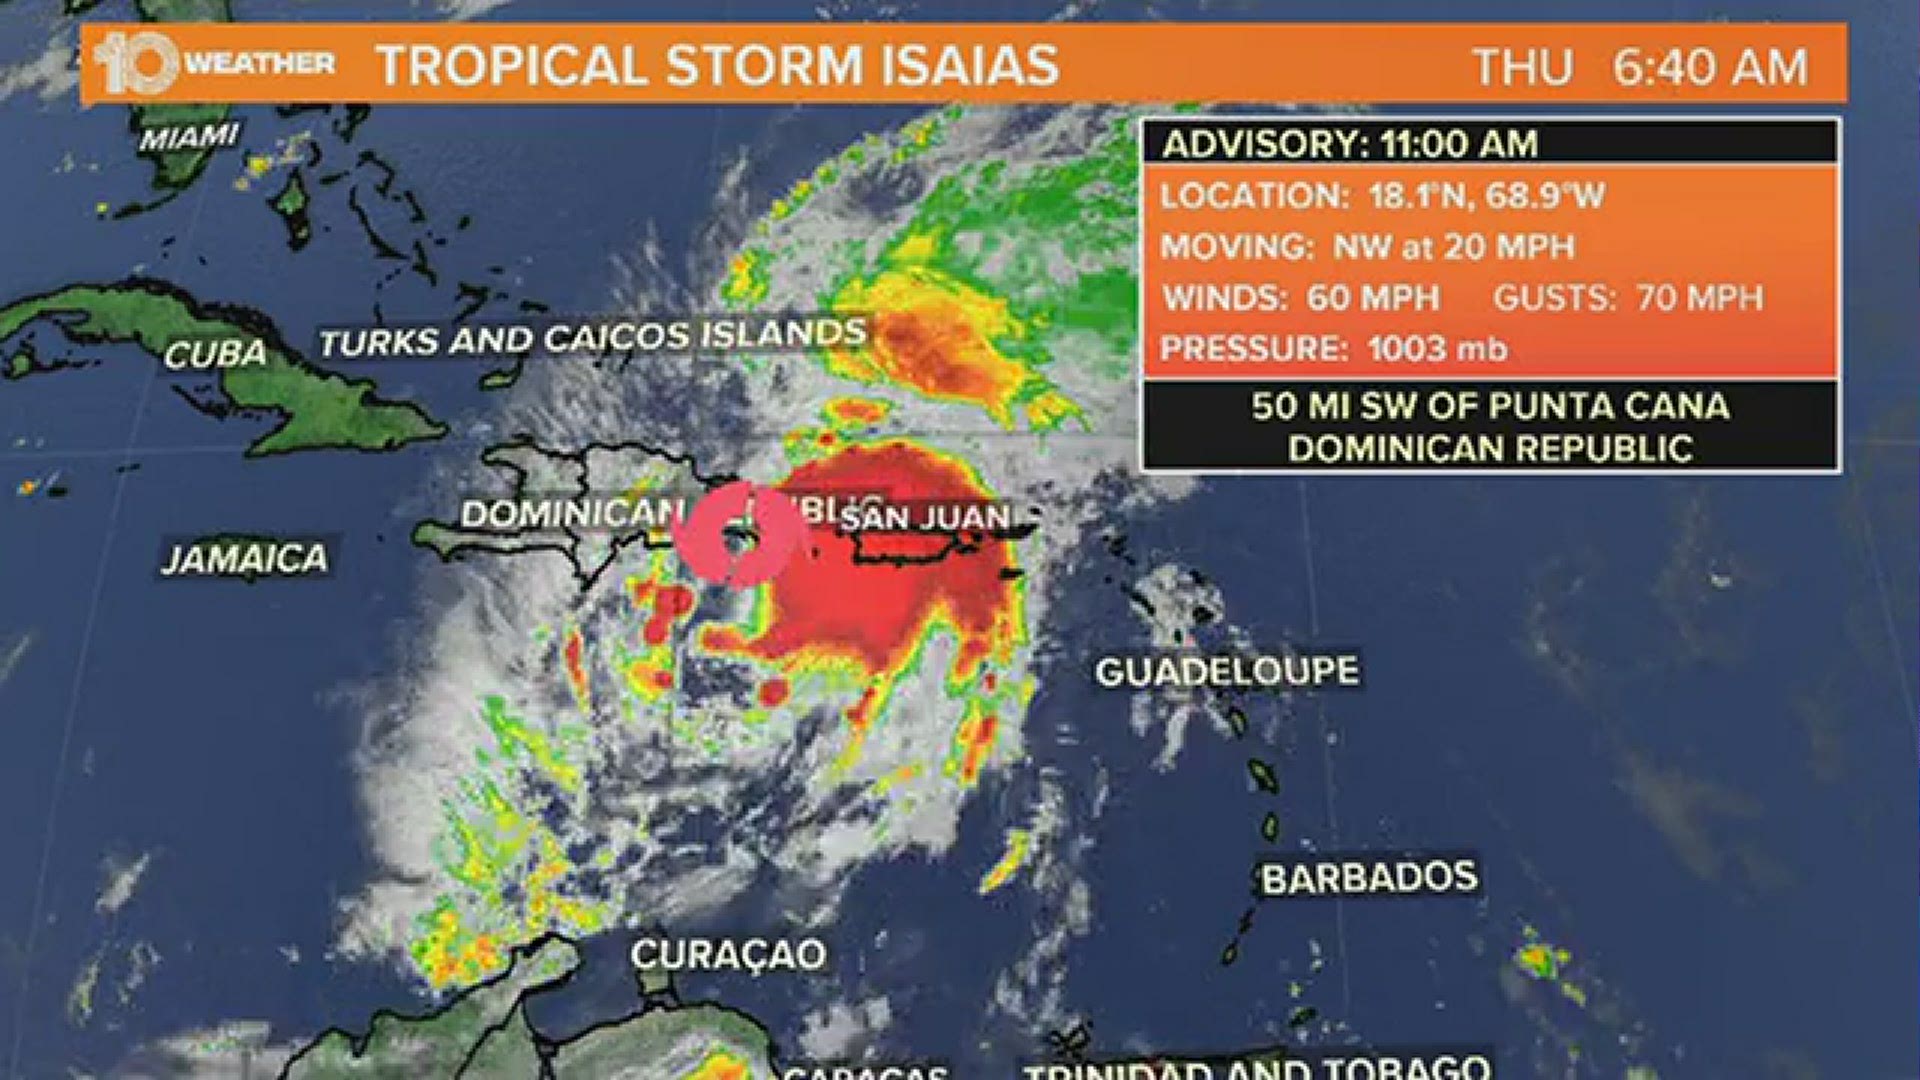 Tracking Tropical Storm Isaias: 11 a.m. July 30, 2020, the storm's cone of uncertainty shifted slightly to the east.